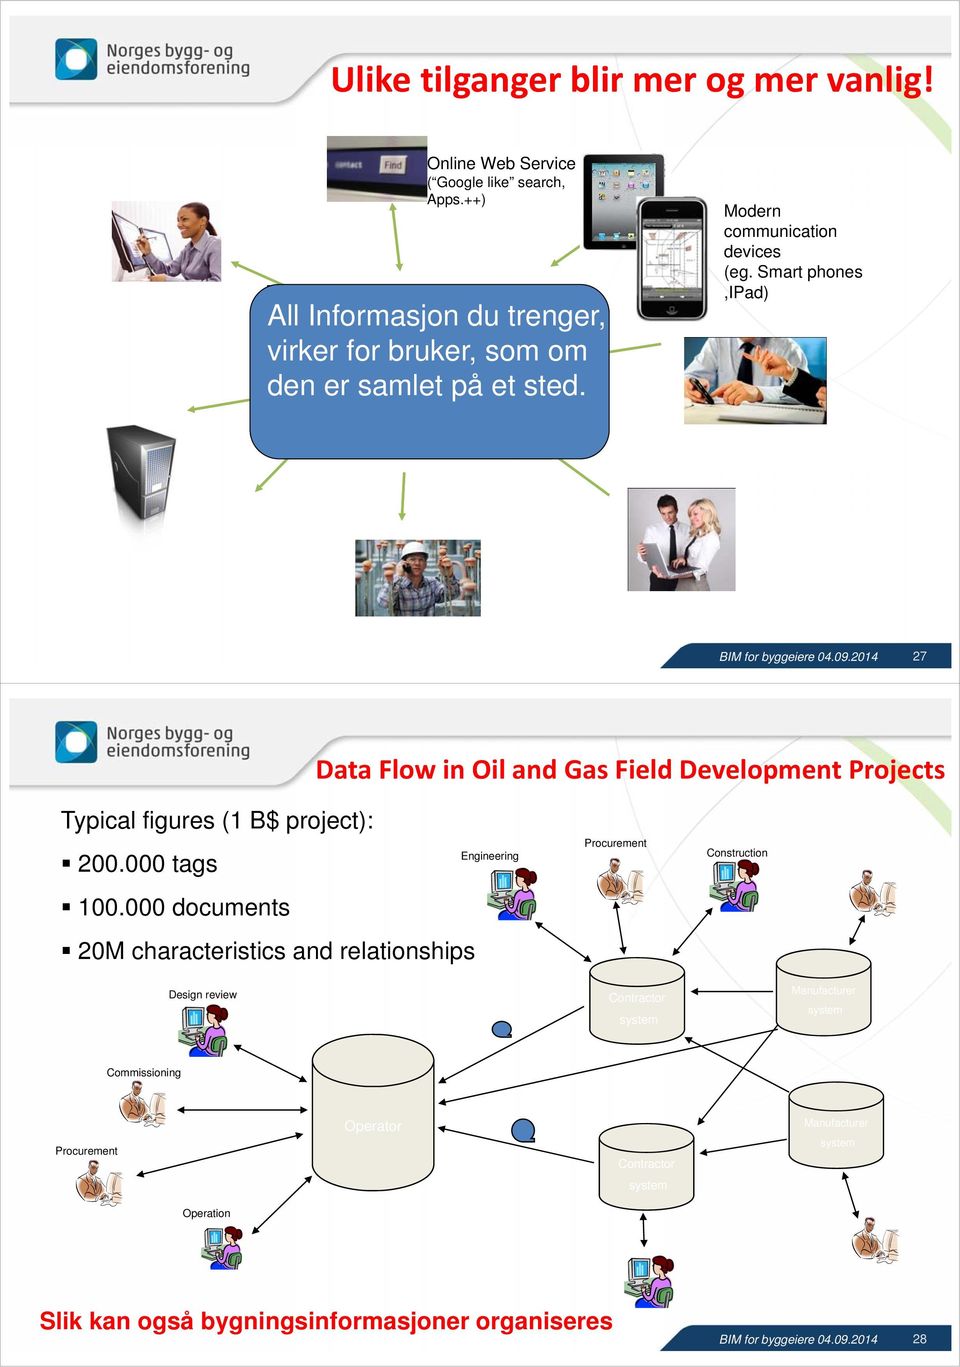 services Modern communication devices (eg. Smart phones,ipad) 27 Data Flow in Oil and Gas Field Development Projects Typical figures (1 B$ project): 200.